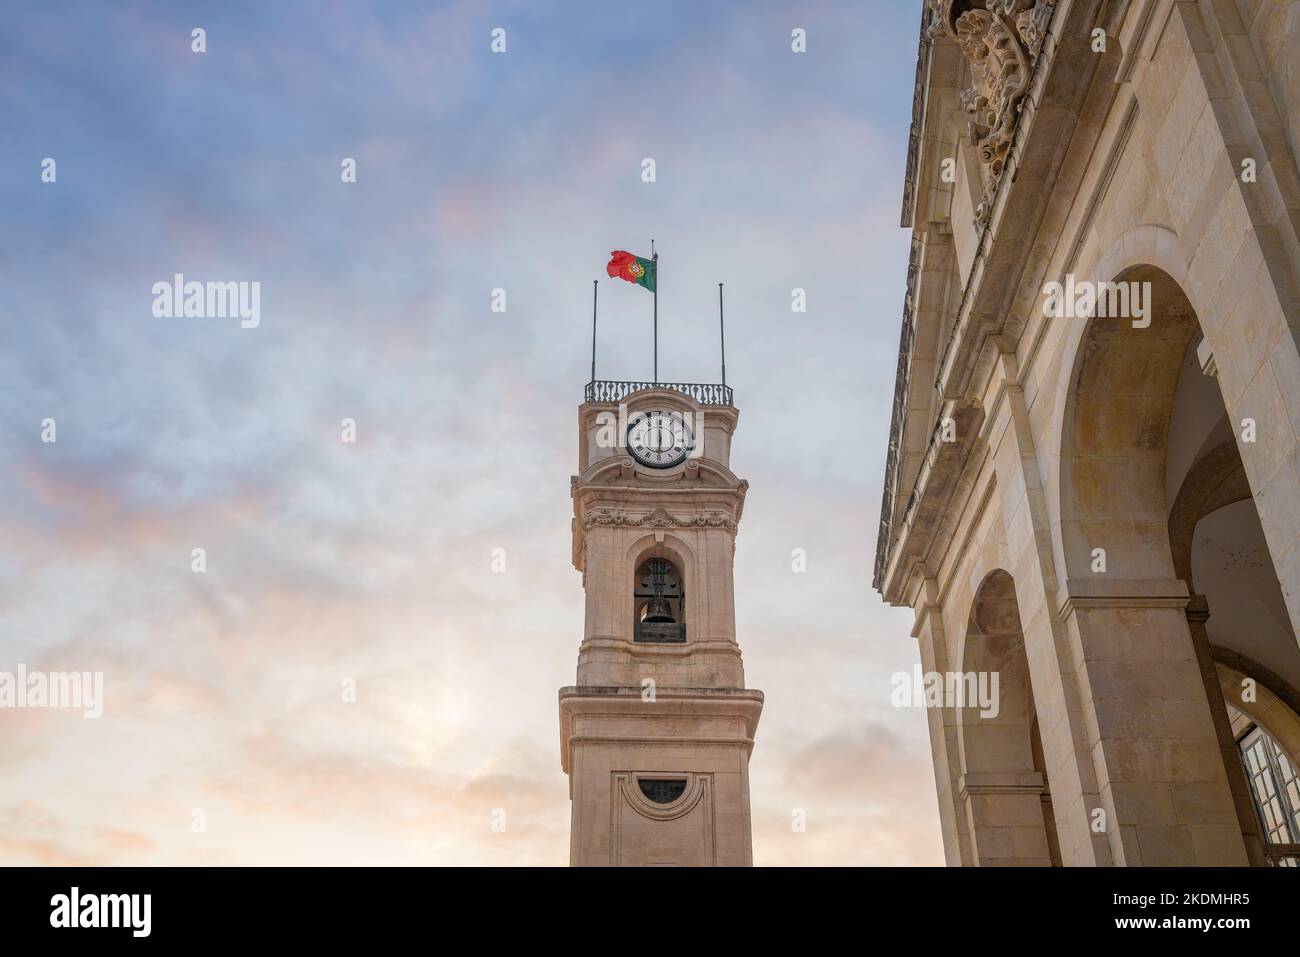 University Tower at sunset - Coimbra, Portugal Stock Photo